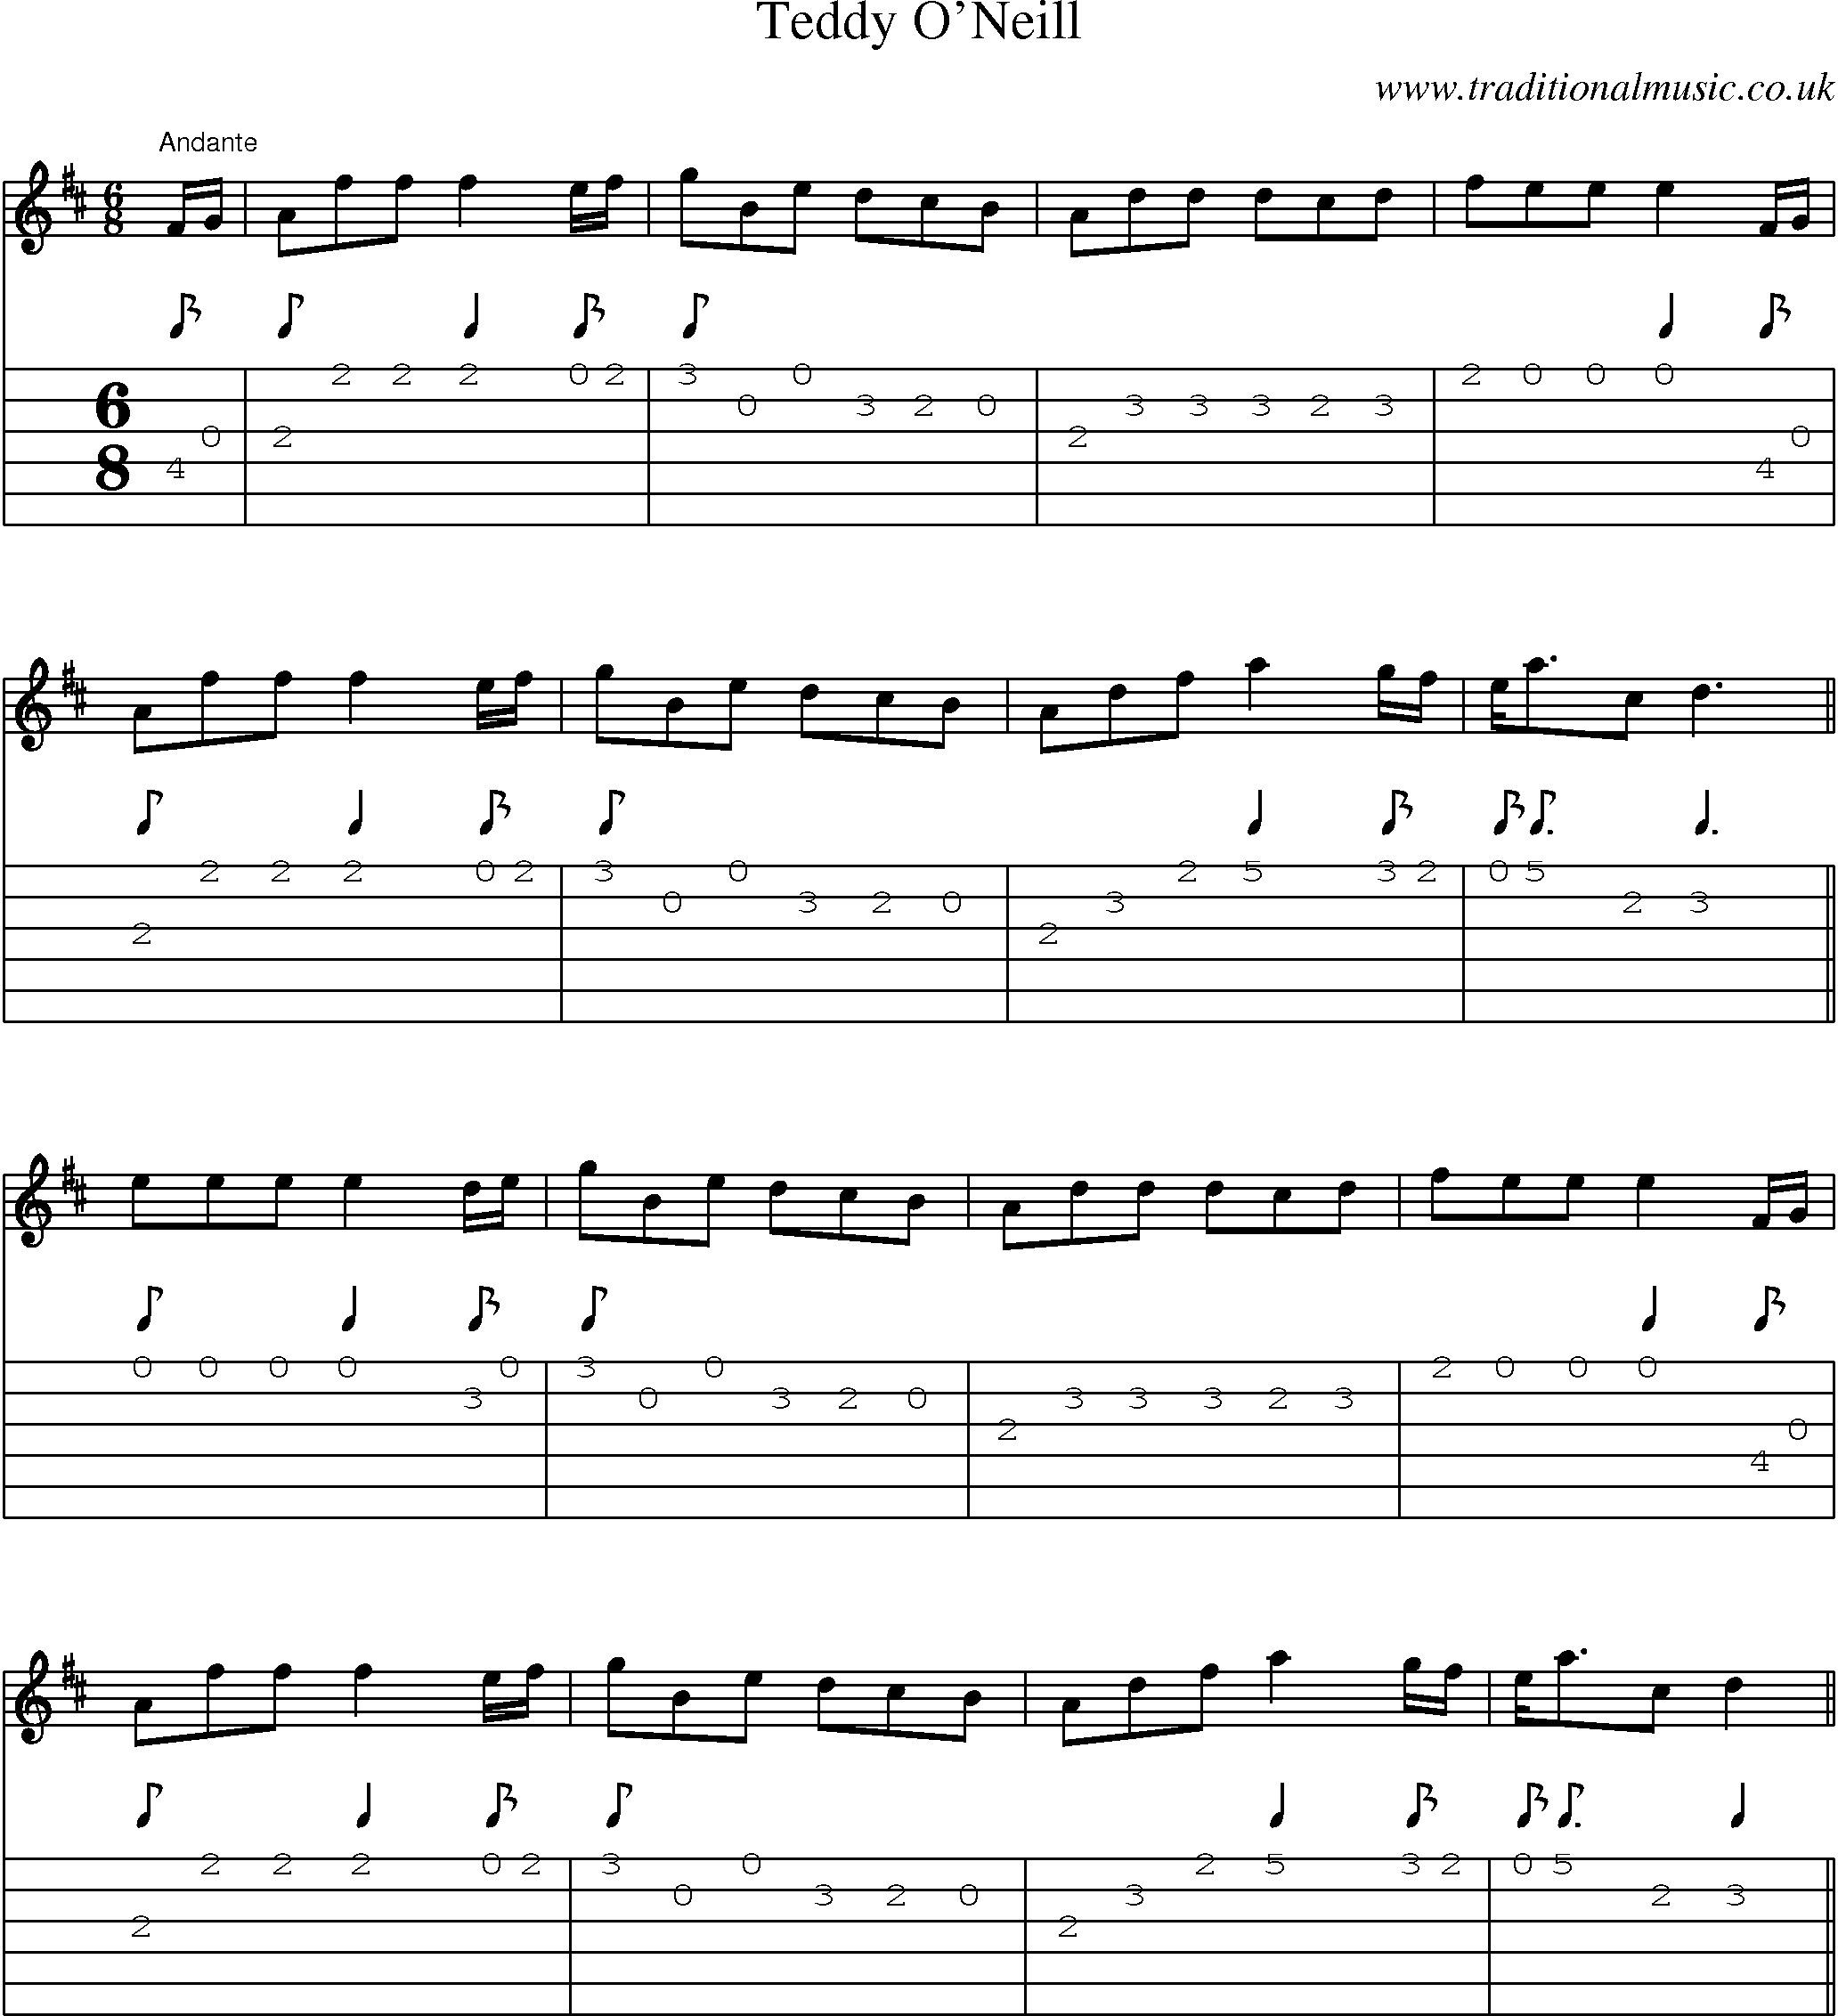 Music Score and Guitar Tabs for Teddy Oneill